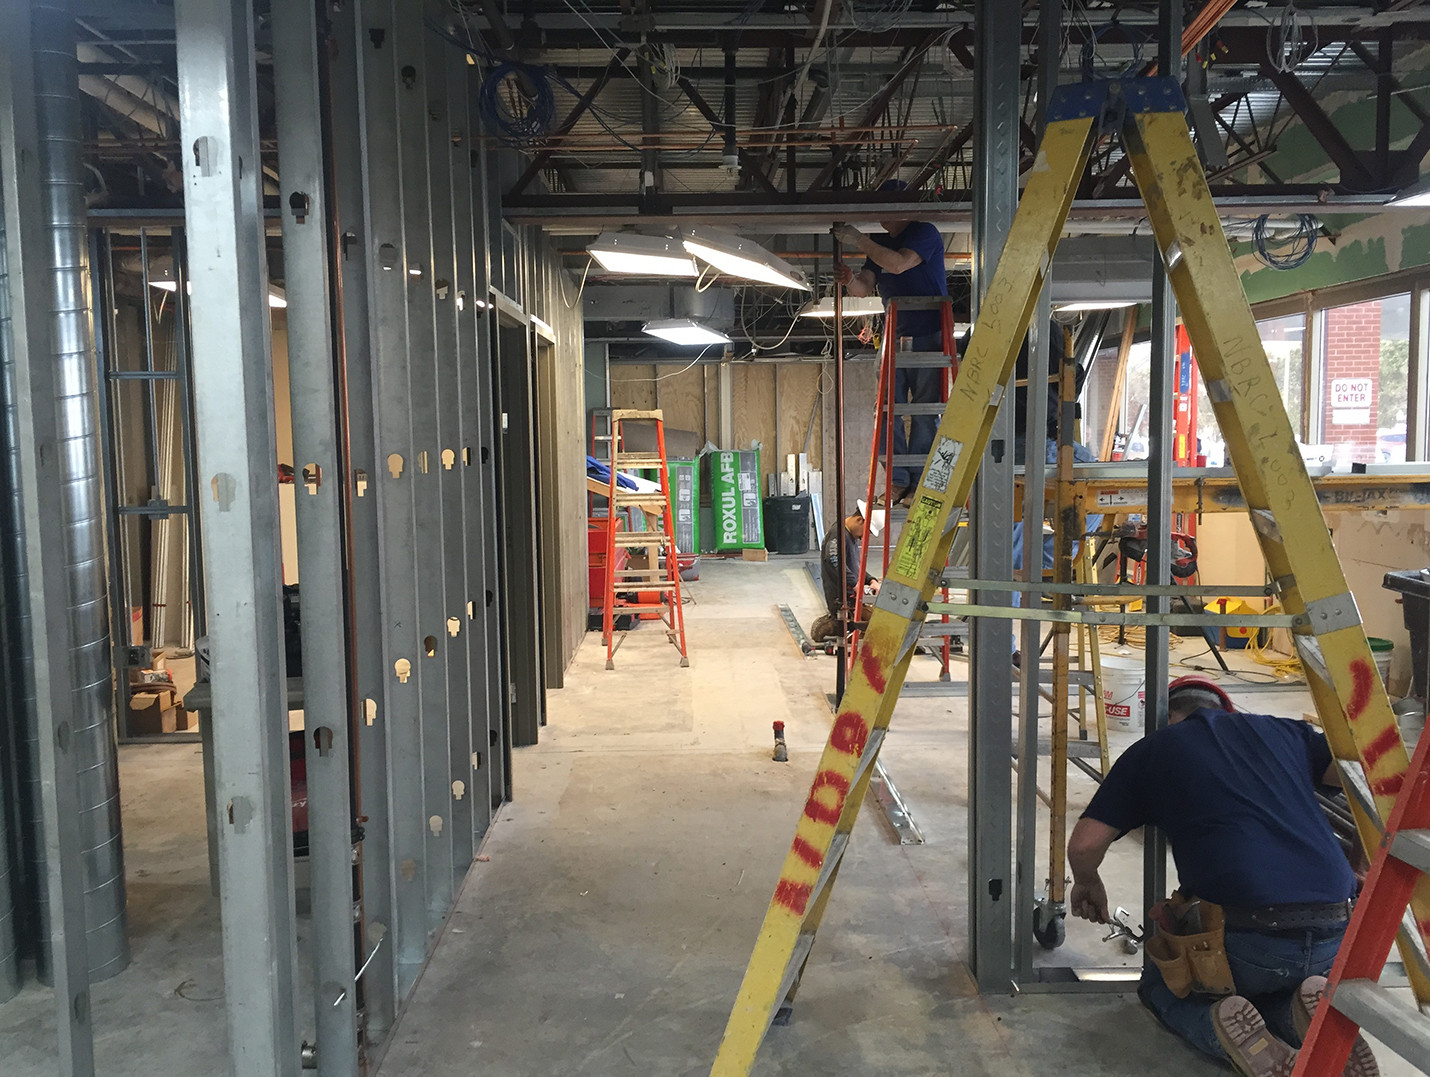 Slocum Dickson Medical Group – Ophthalmology Suite Renovations